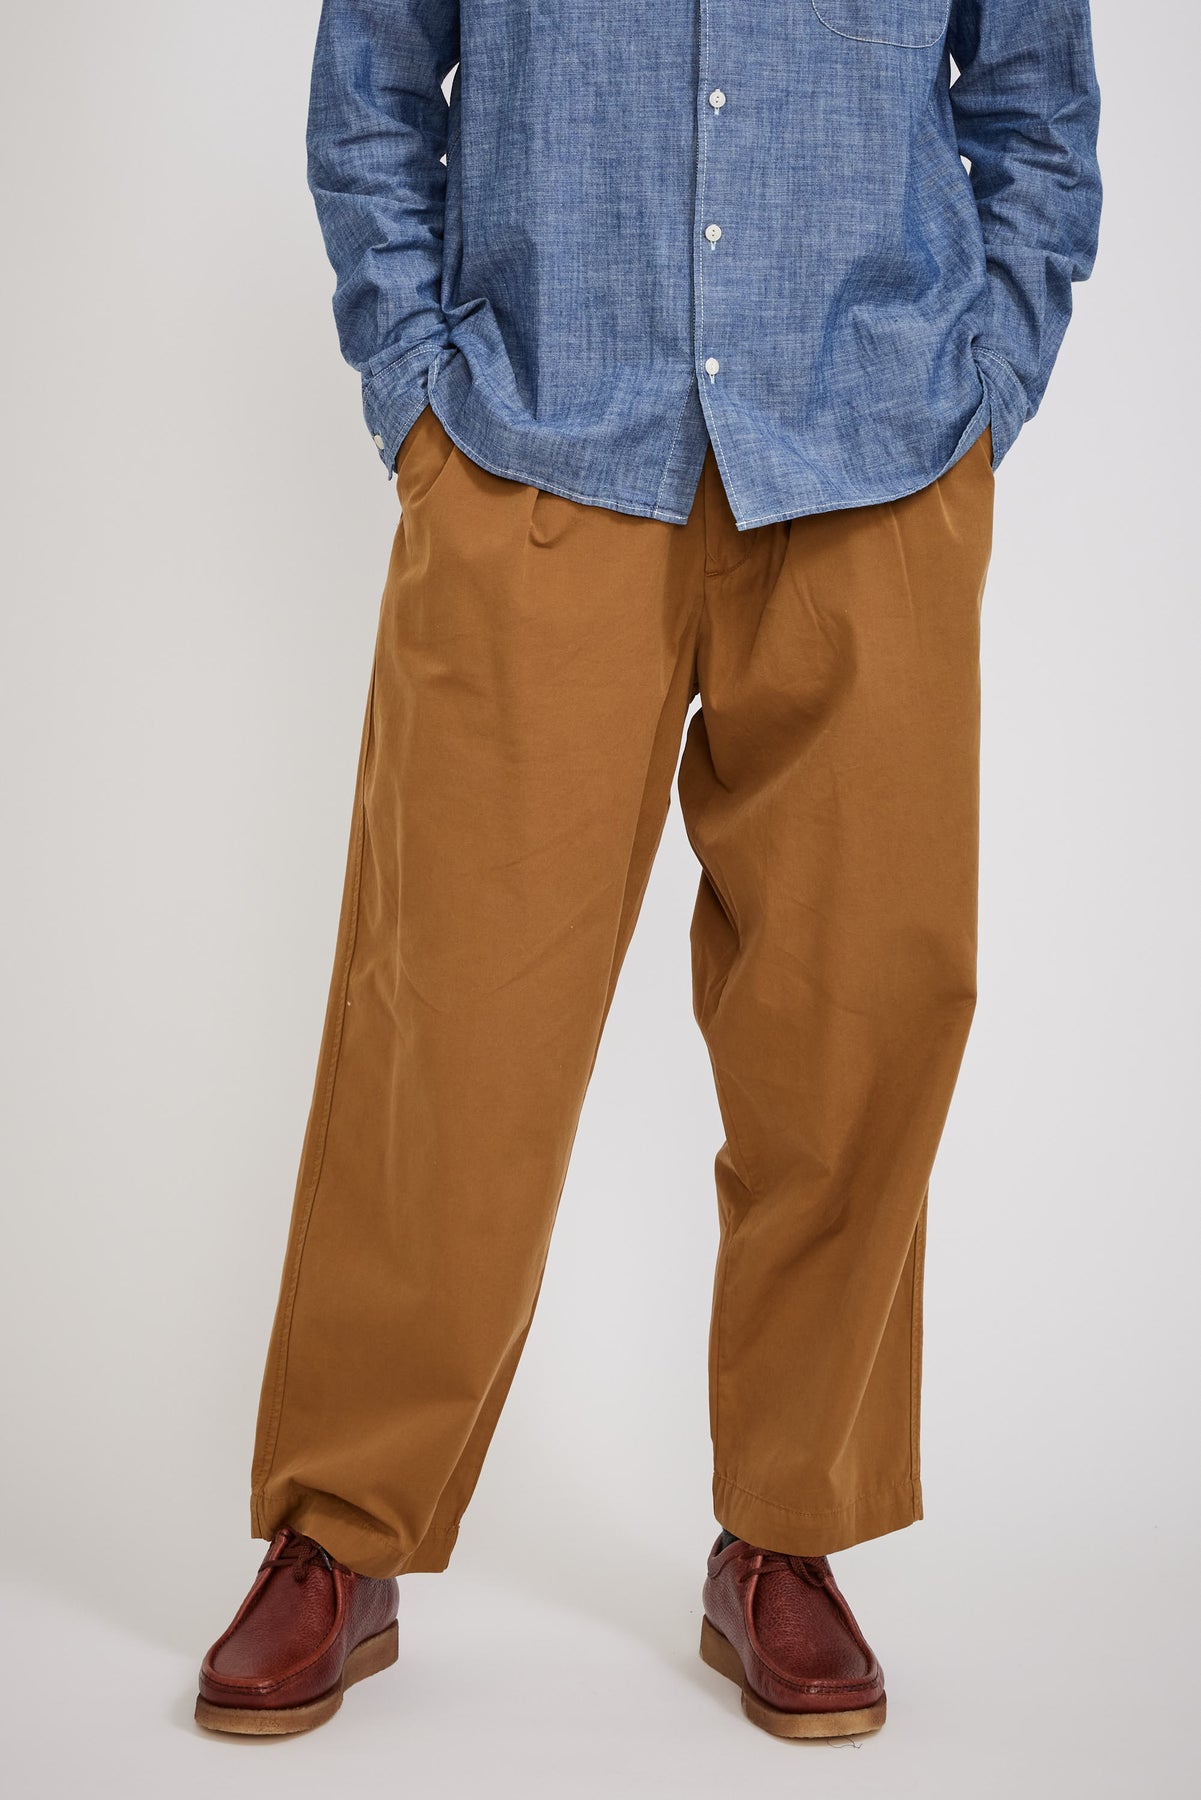 Universal Works Aston Pant Navy Twill at Dandy Fellow